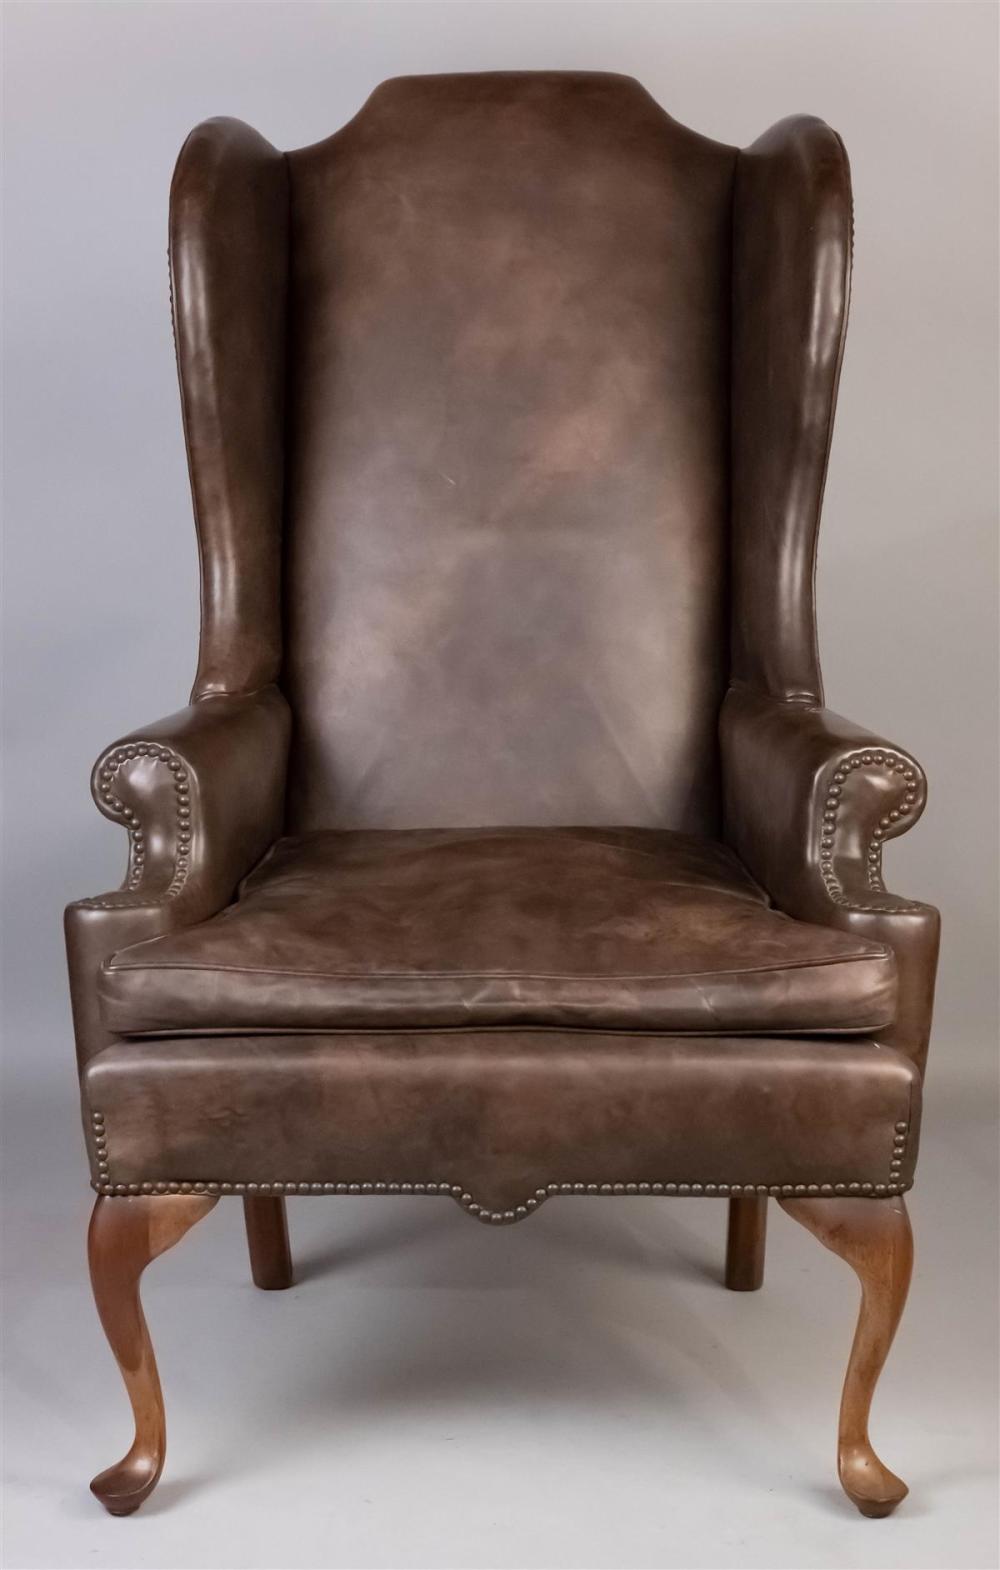 QUEEN ANNE STYLE LEATHER UPHOLSTERED